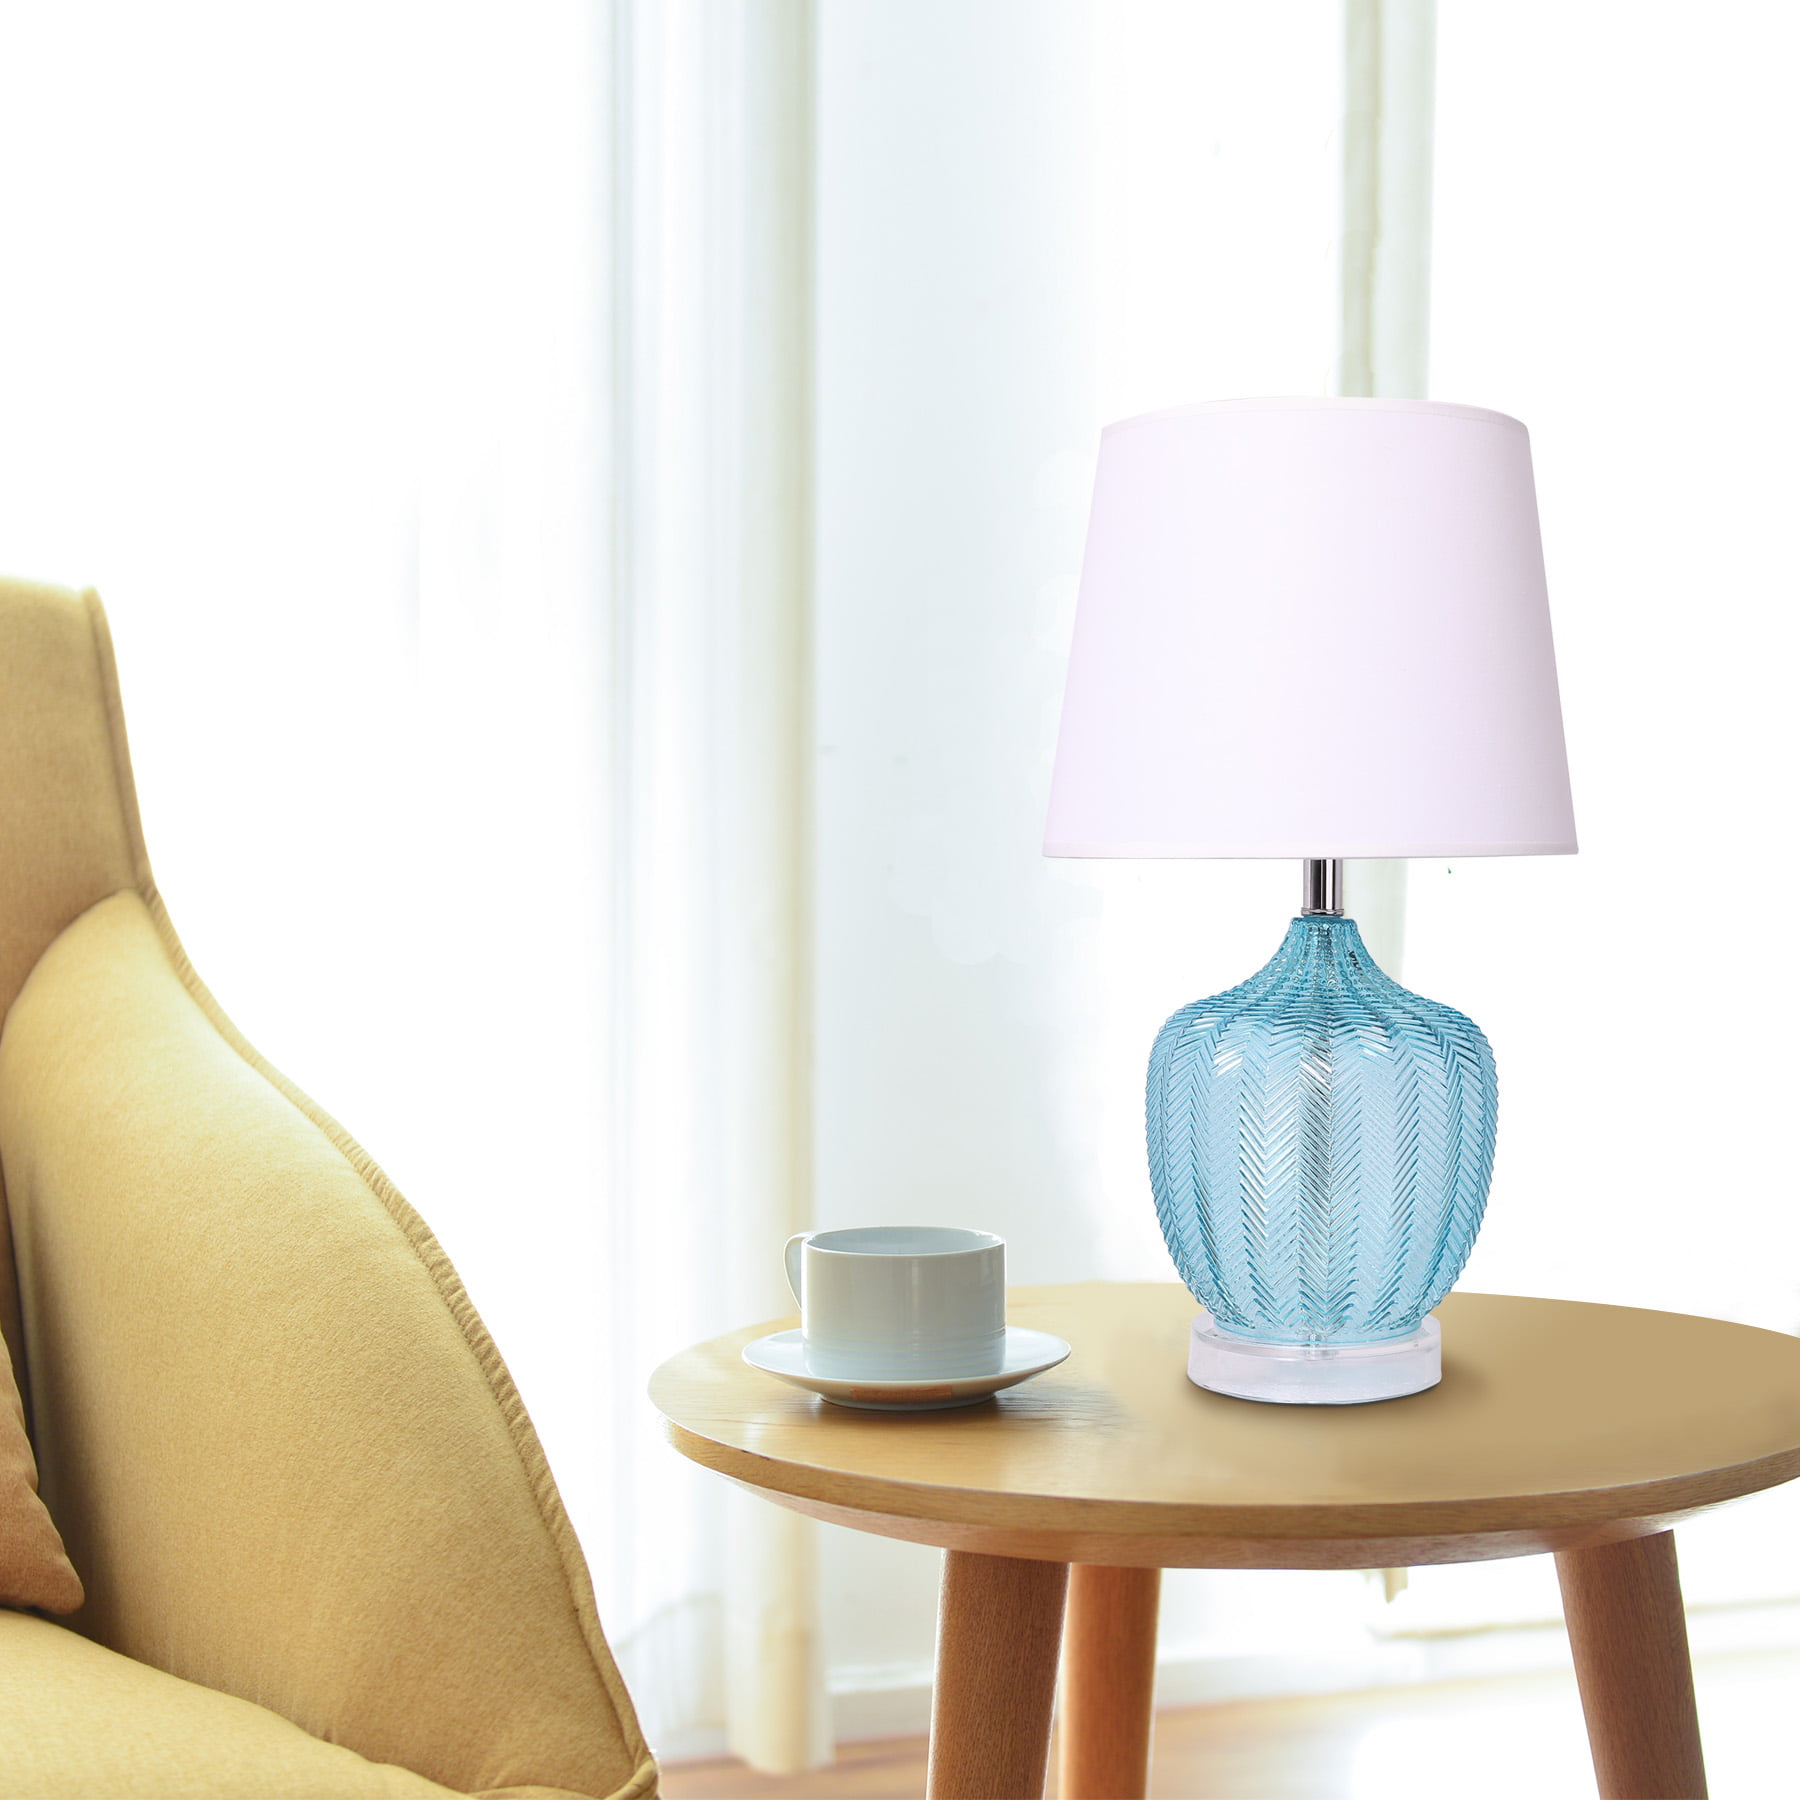 Modern Table Lamp with Blue Glass Base,Qua Blue, Translucent Glass with